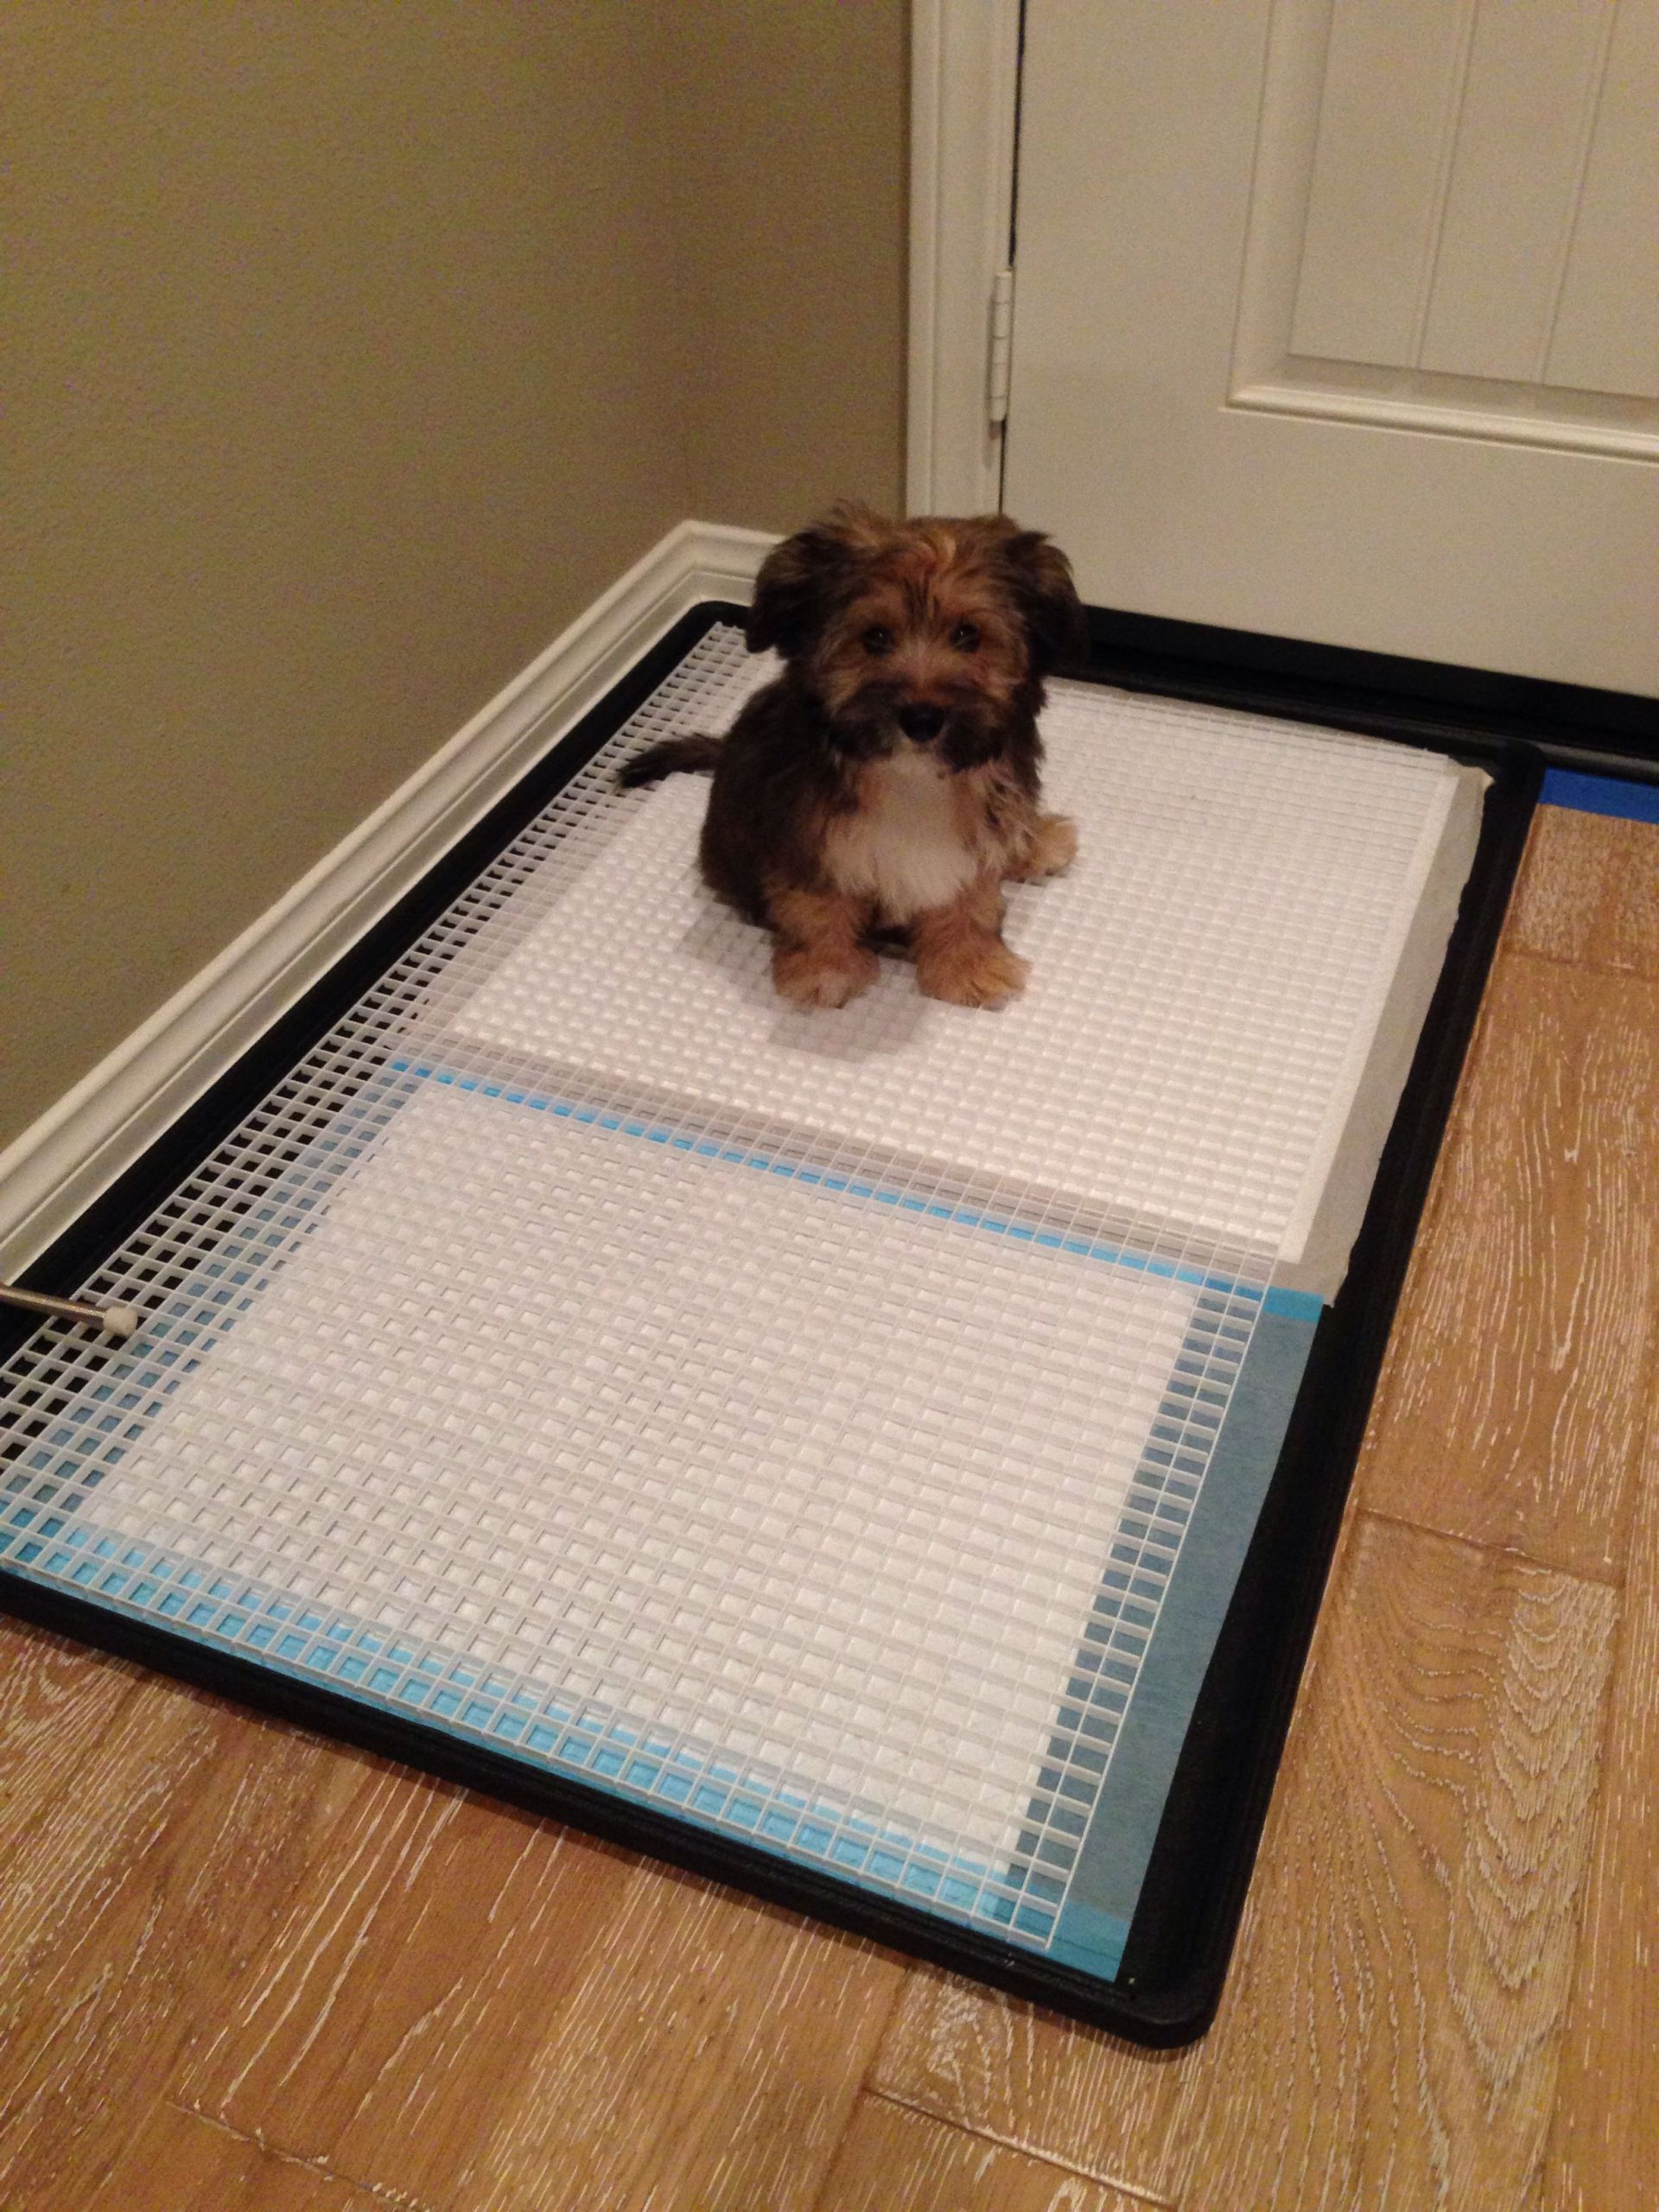 DIY Dog Potty
 DIY dog toilet tray prevents pee puddle from soiling the